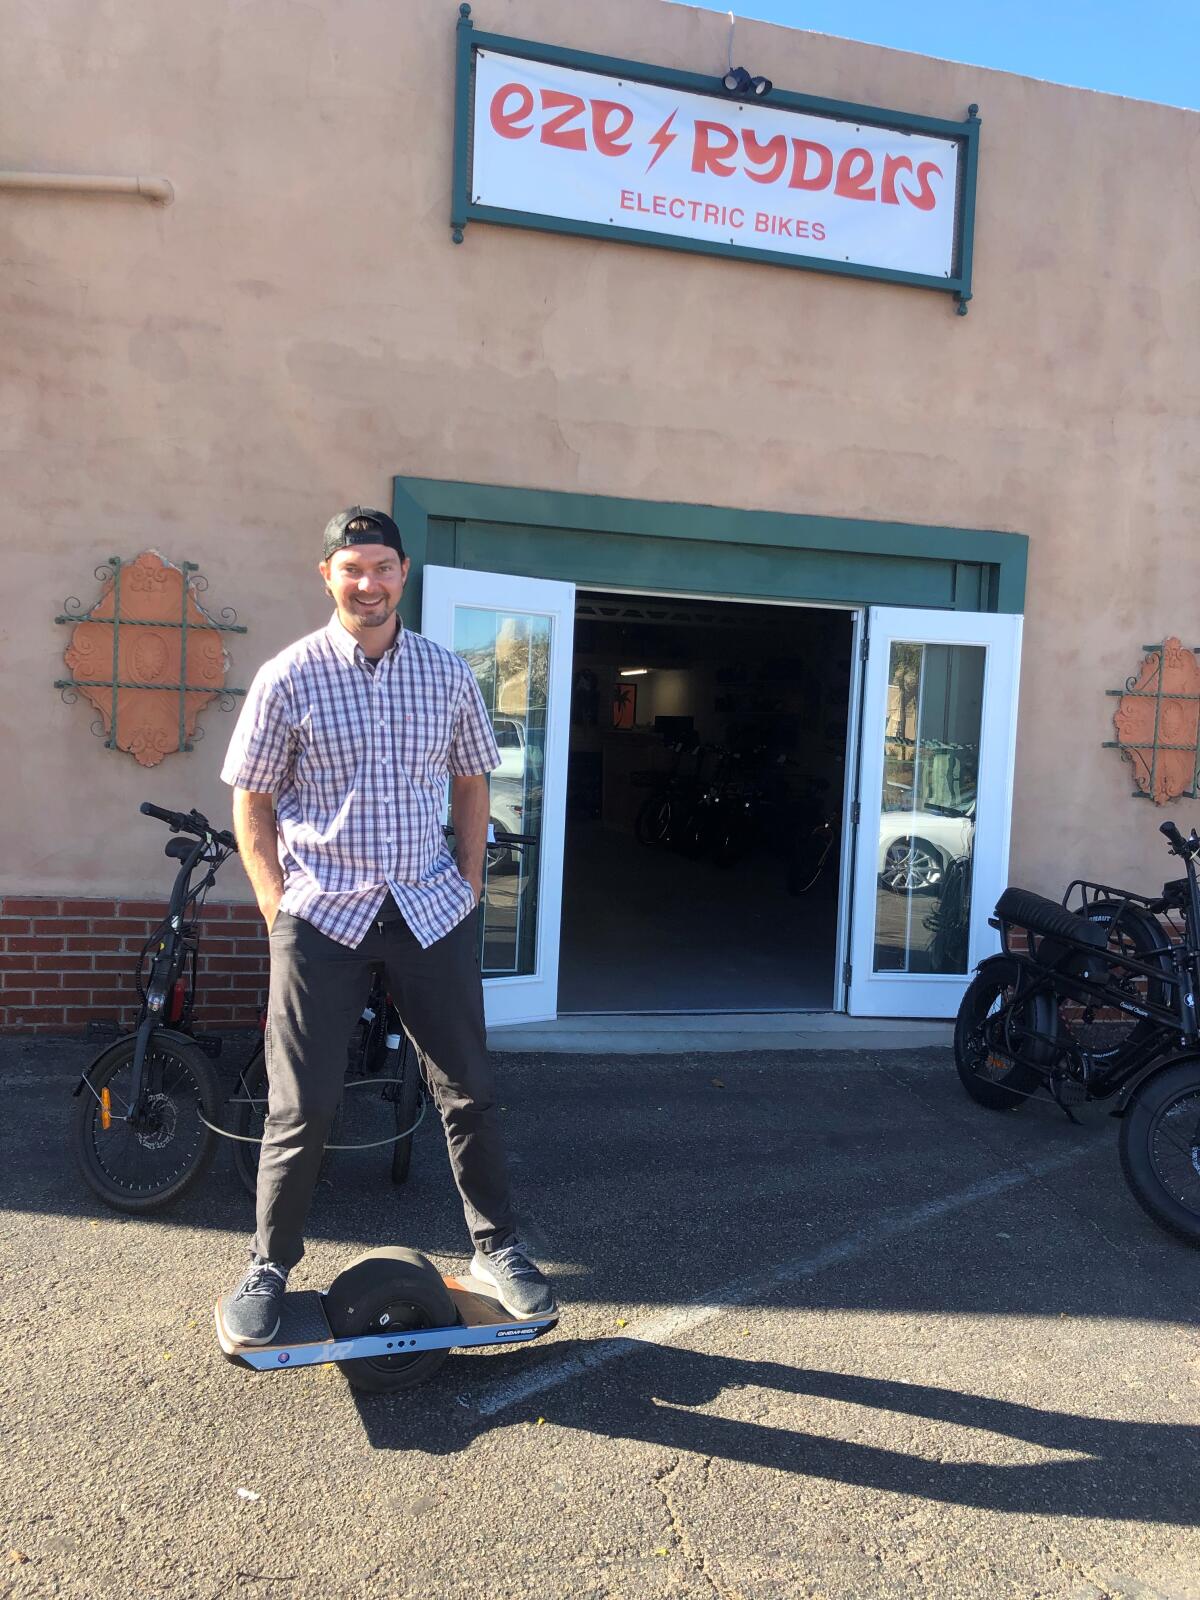 Devin Raymond rolls up outside his new electric bicycle shop, EZE Ryders in Point Loma.